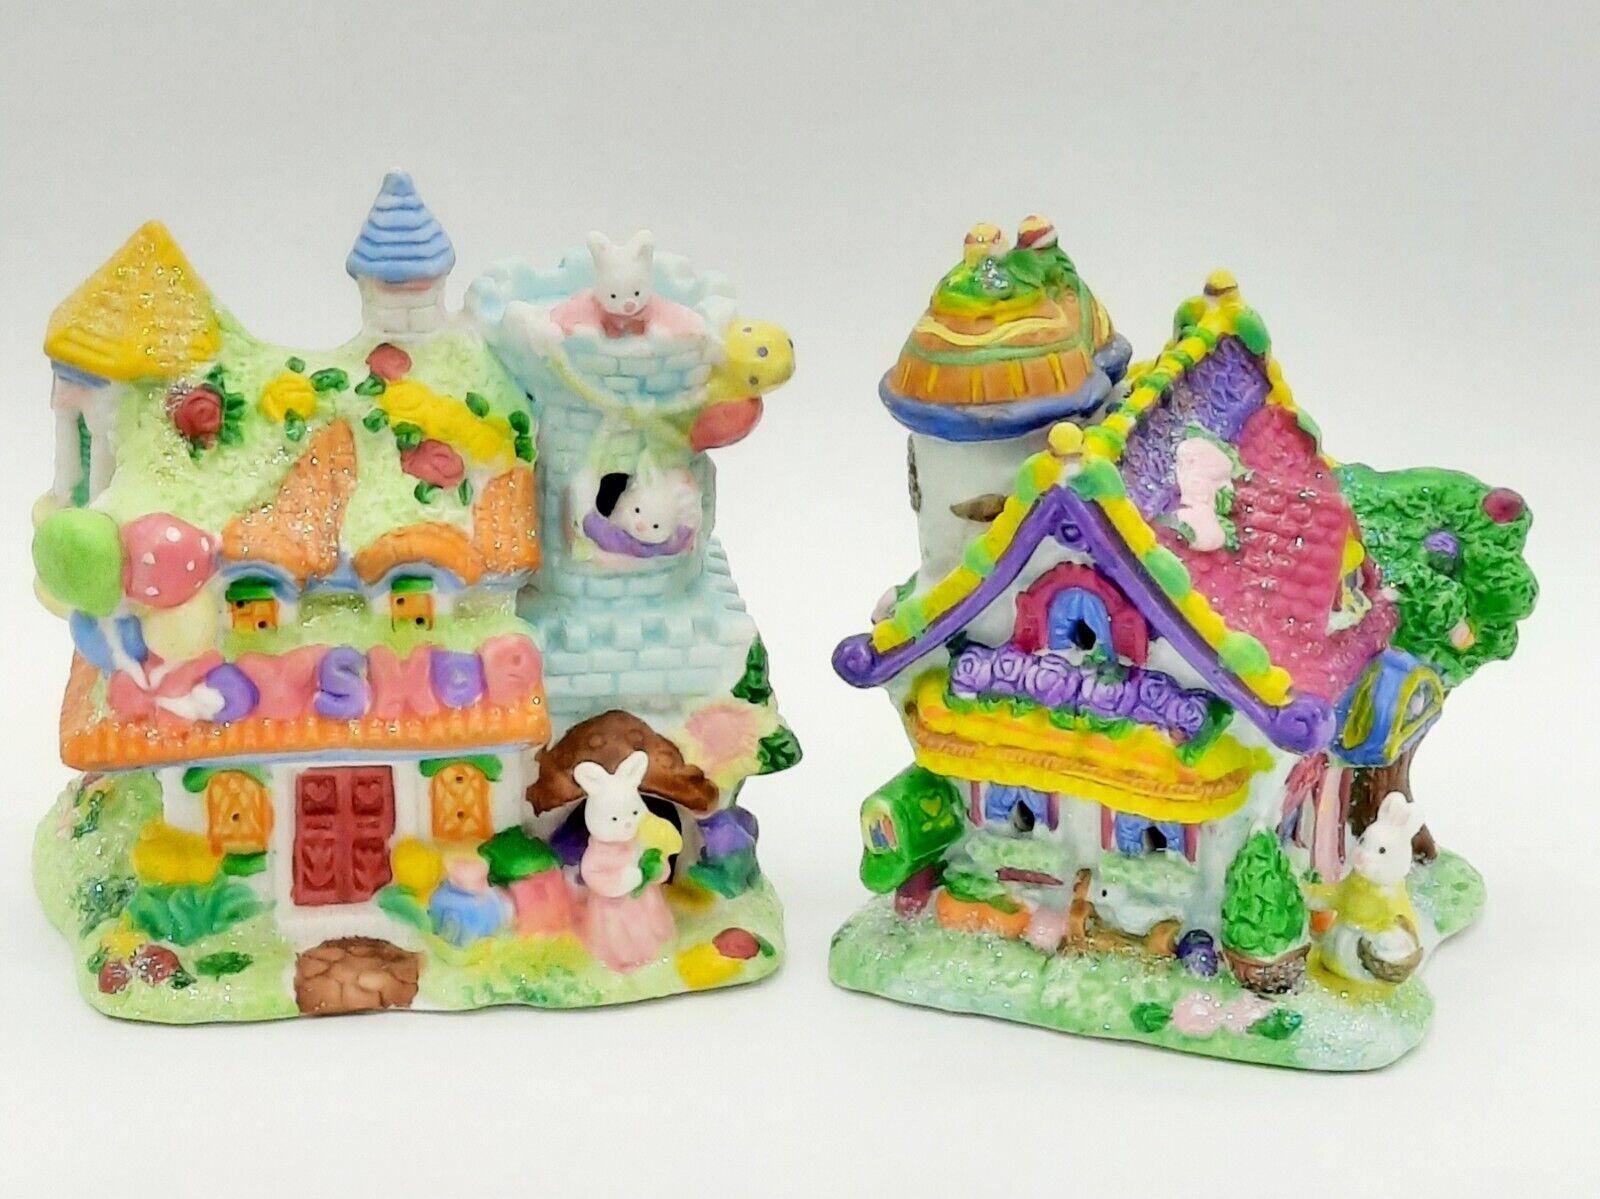 2004 Hoppy Hollow Toy Shop & 2005 Jelly Bean Junction Easter Village House